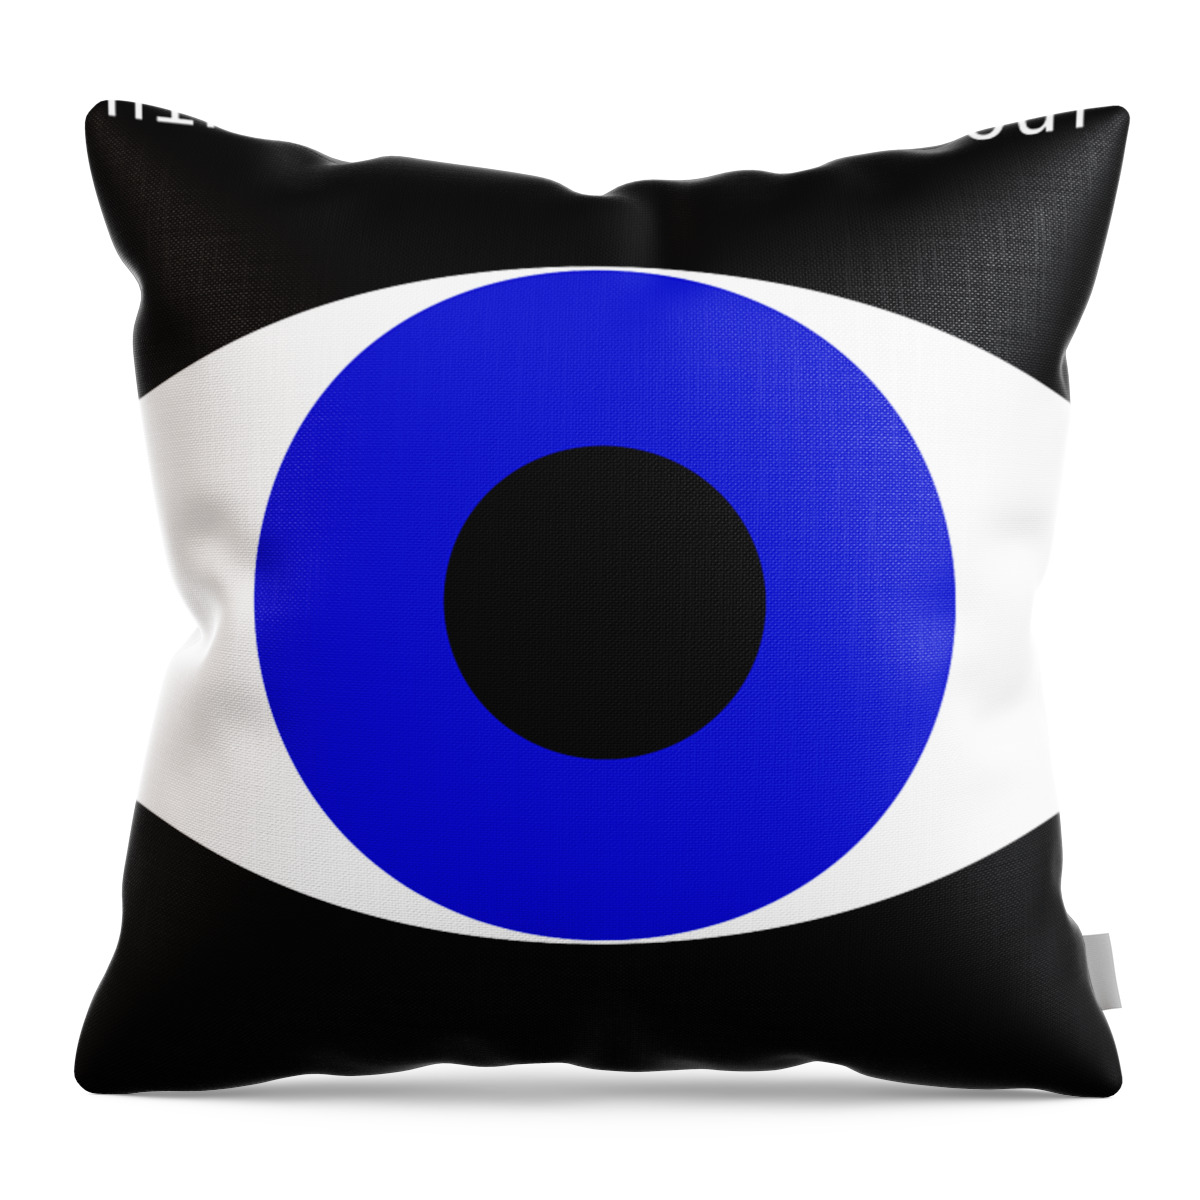 Richard Reeve Throw Pillow featuring the digital art Big Brother by Richard Reeve